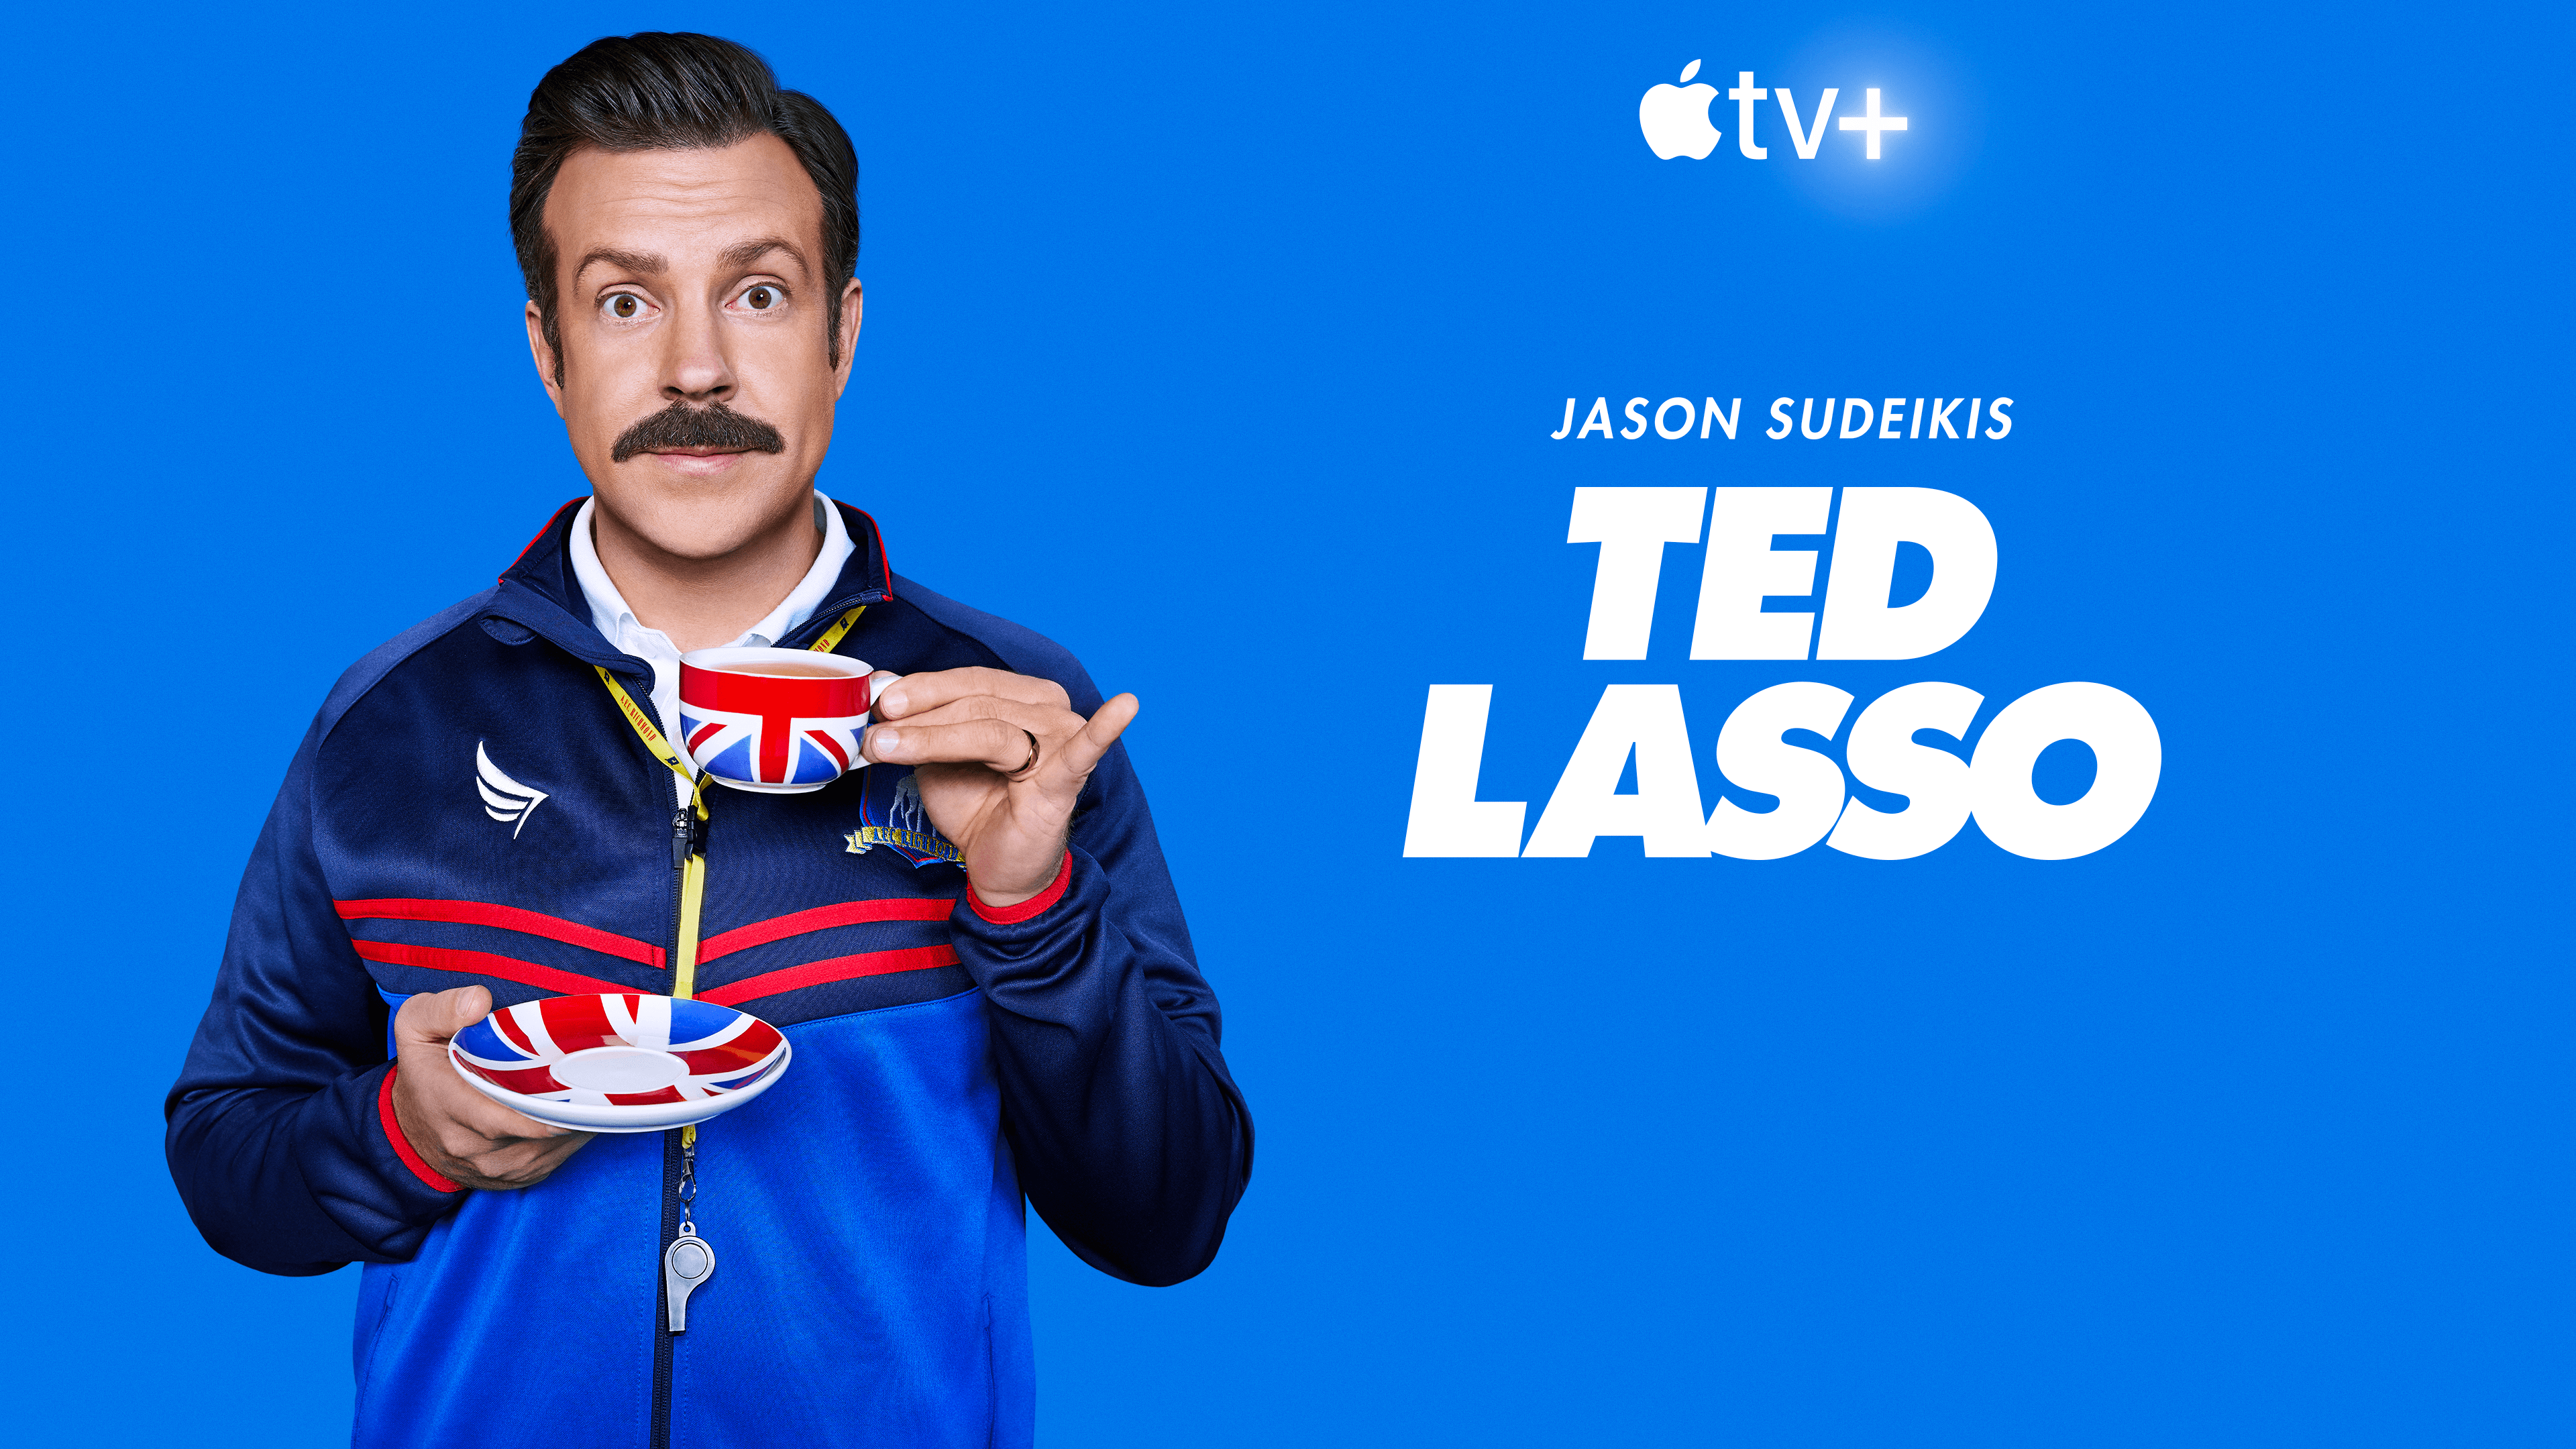 Apple TV+’s “Ted Lasso” Ranks as the Most Popular Streaming Show by TVision